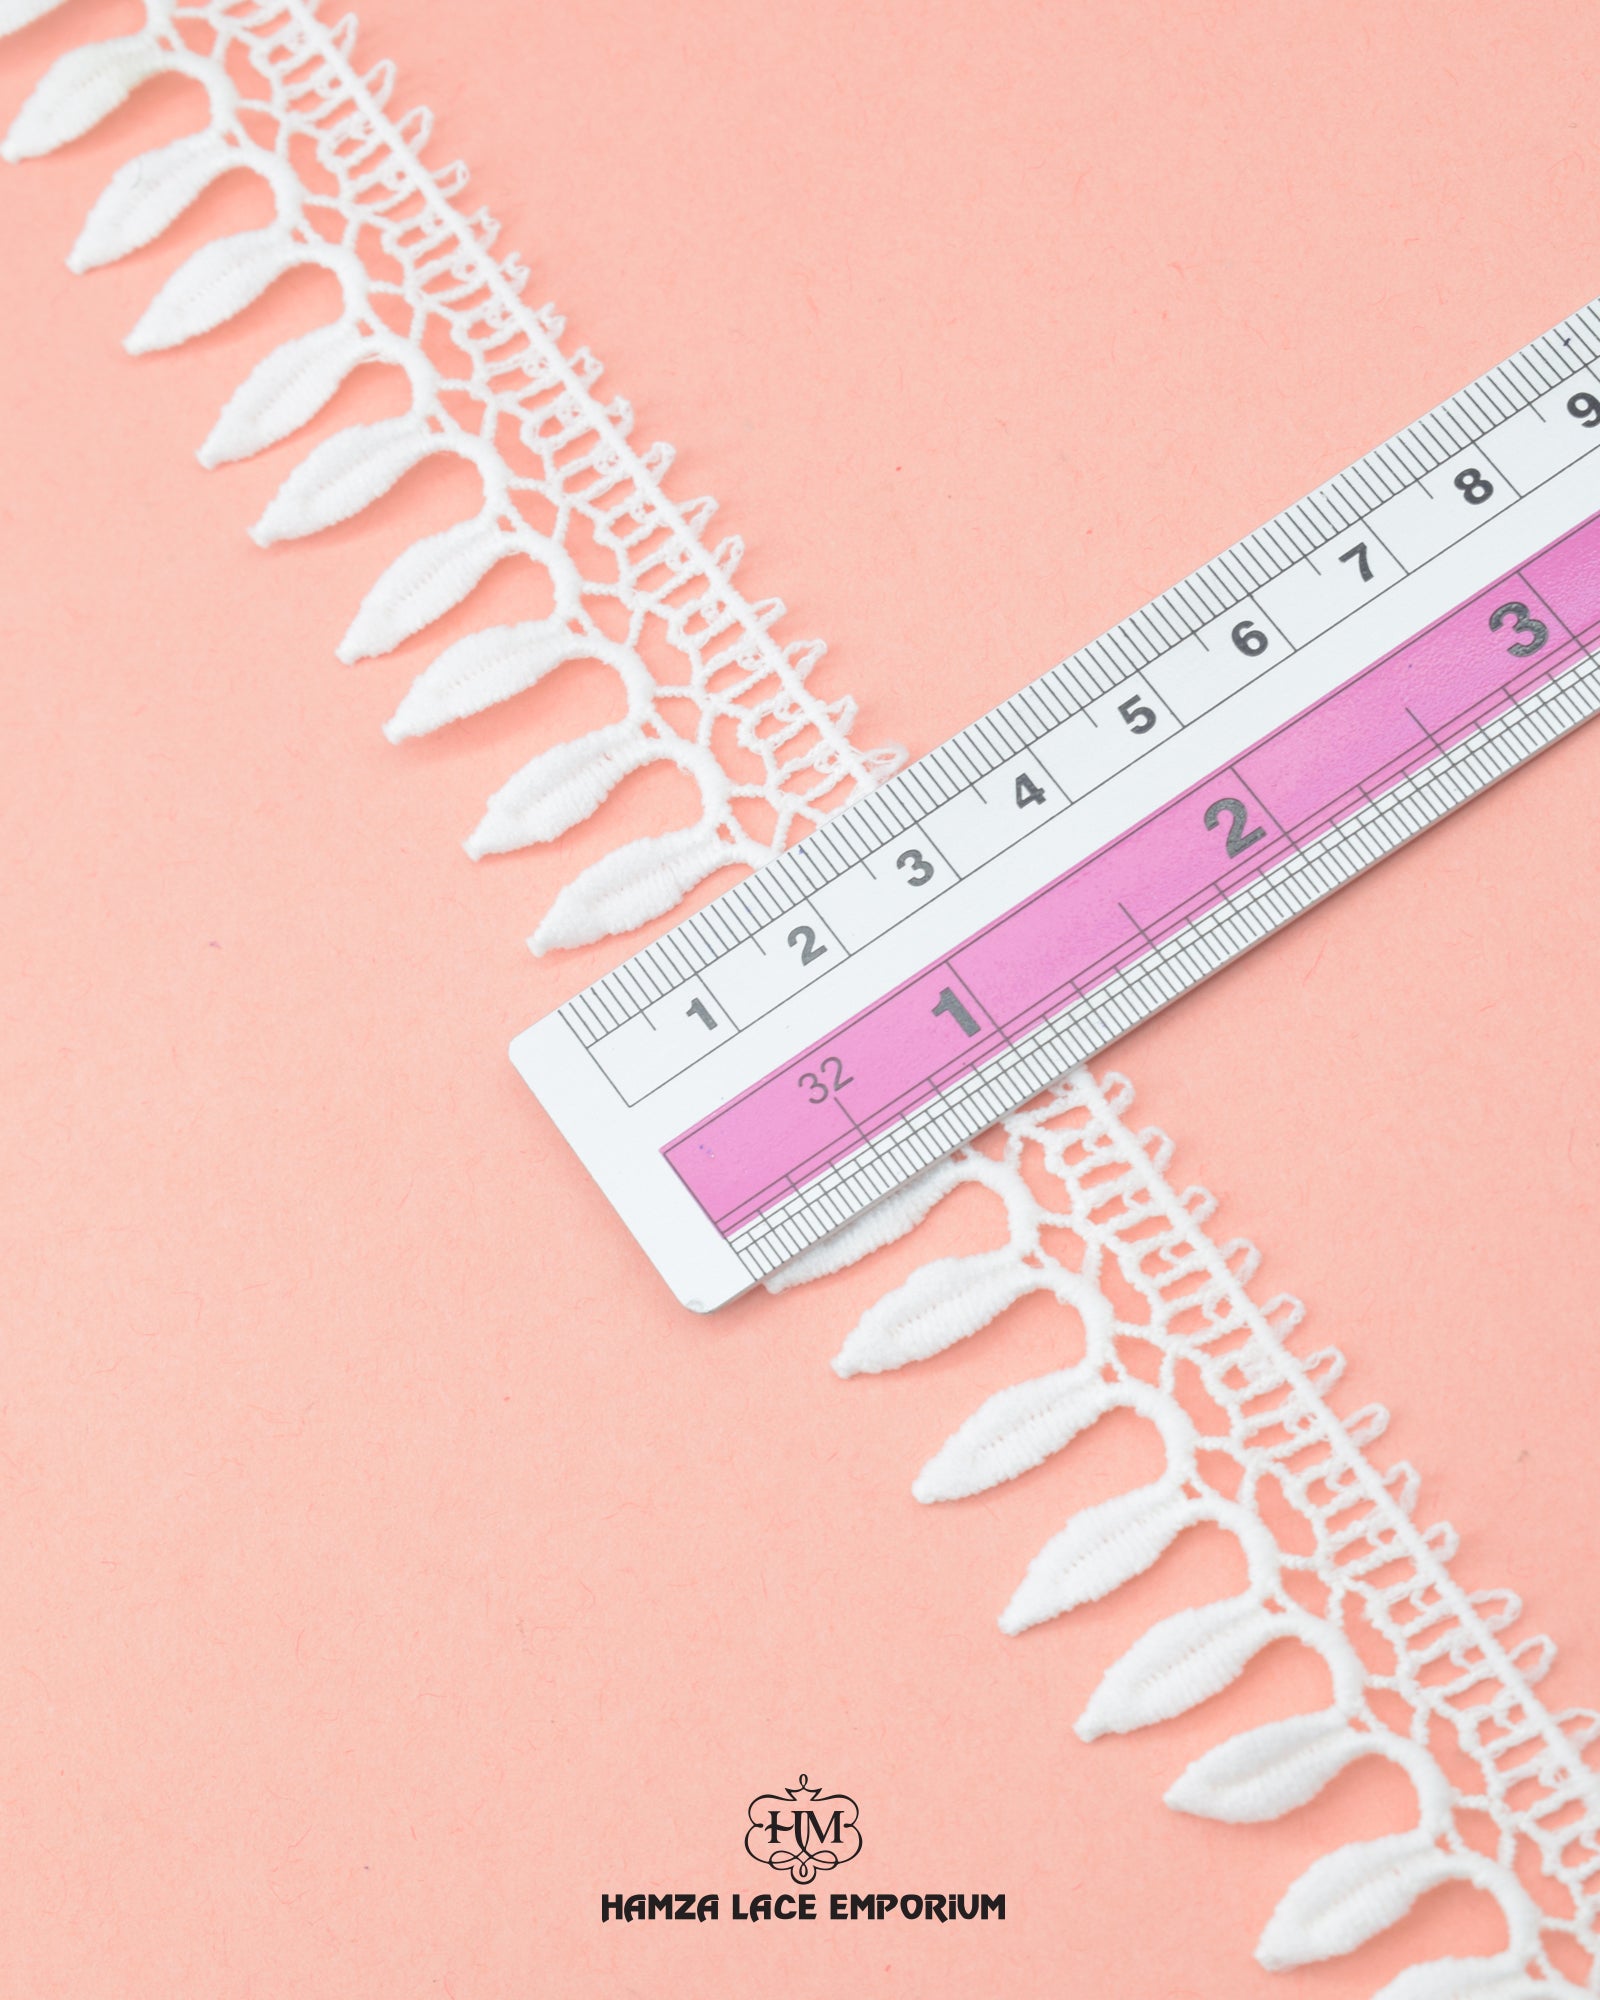 Size of the 'Edging Lace 23323' is shown as '1.25' inches with the help of a ruler